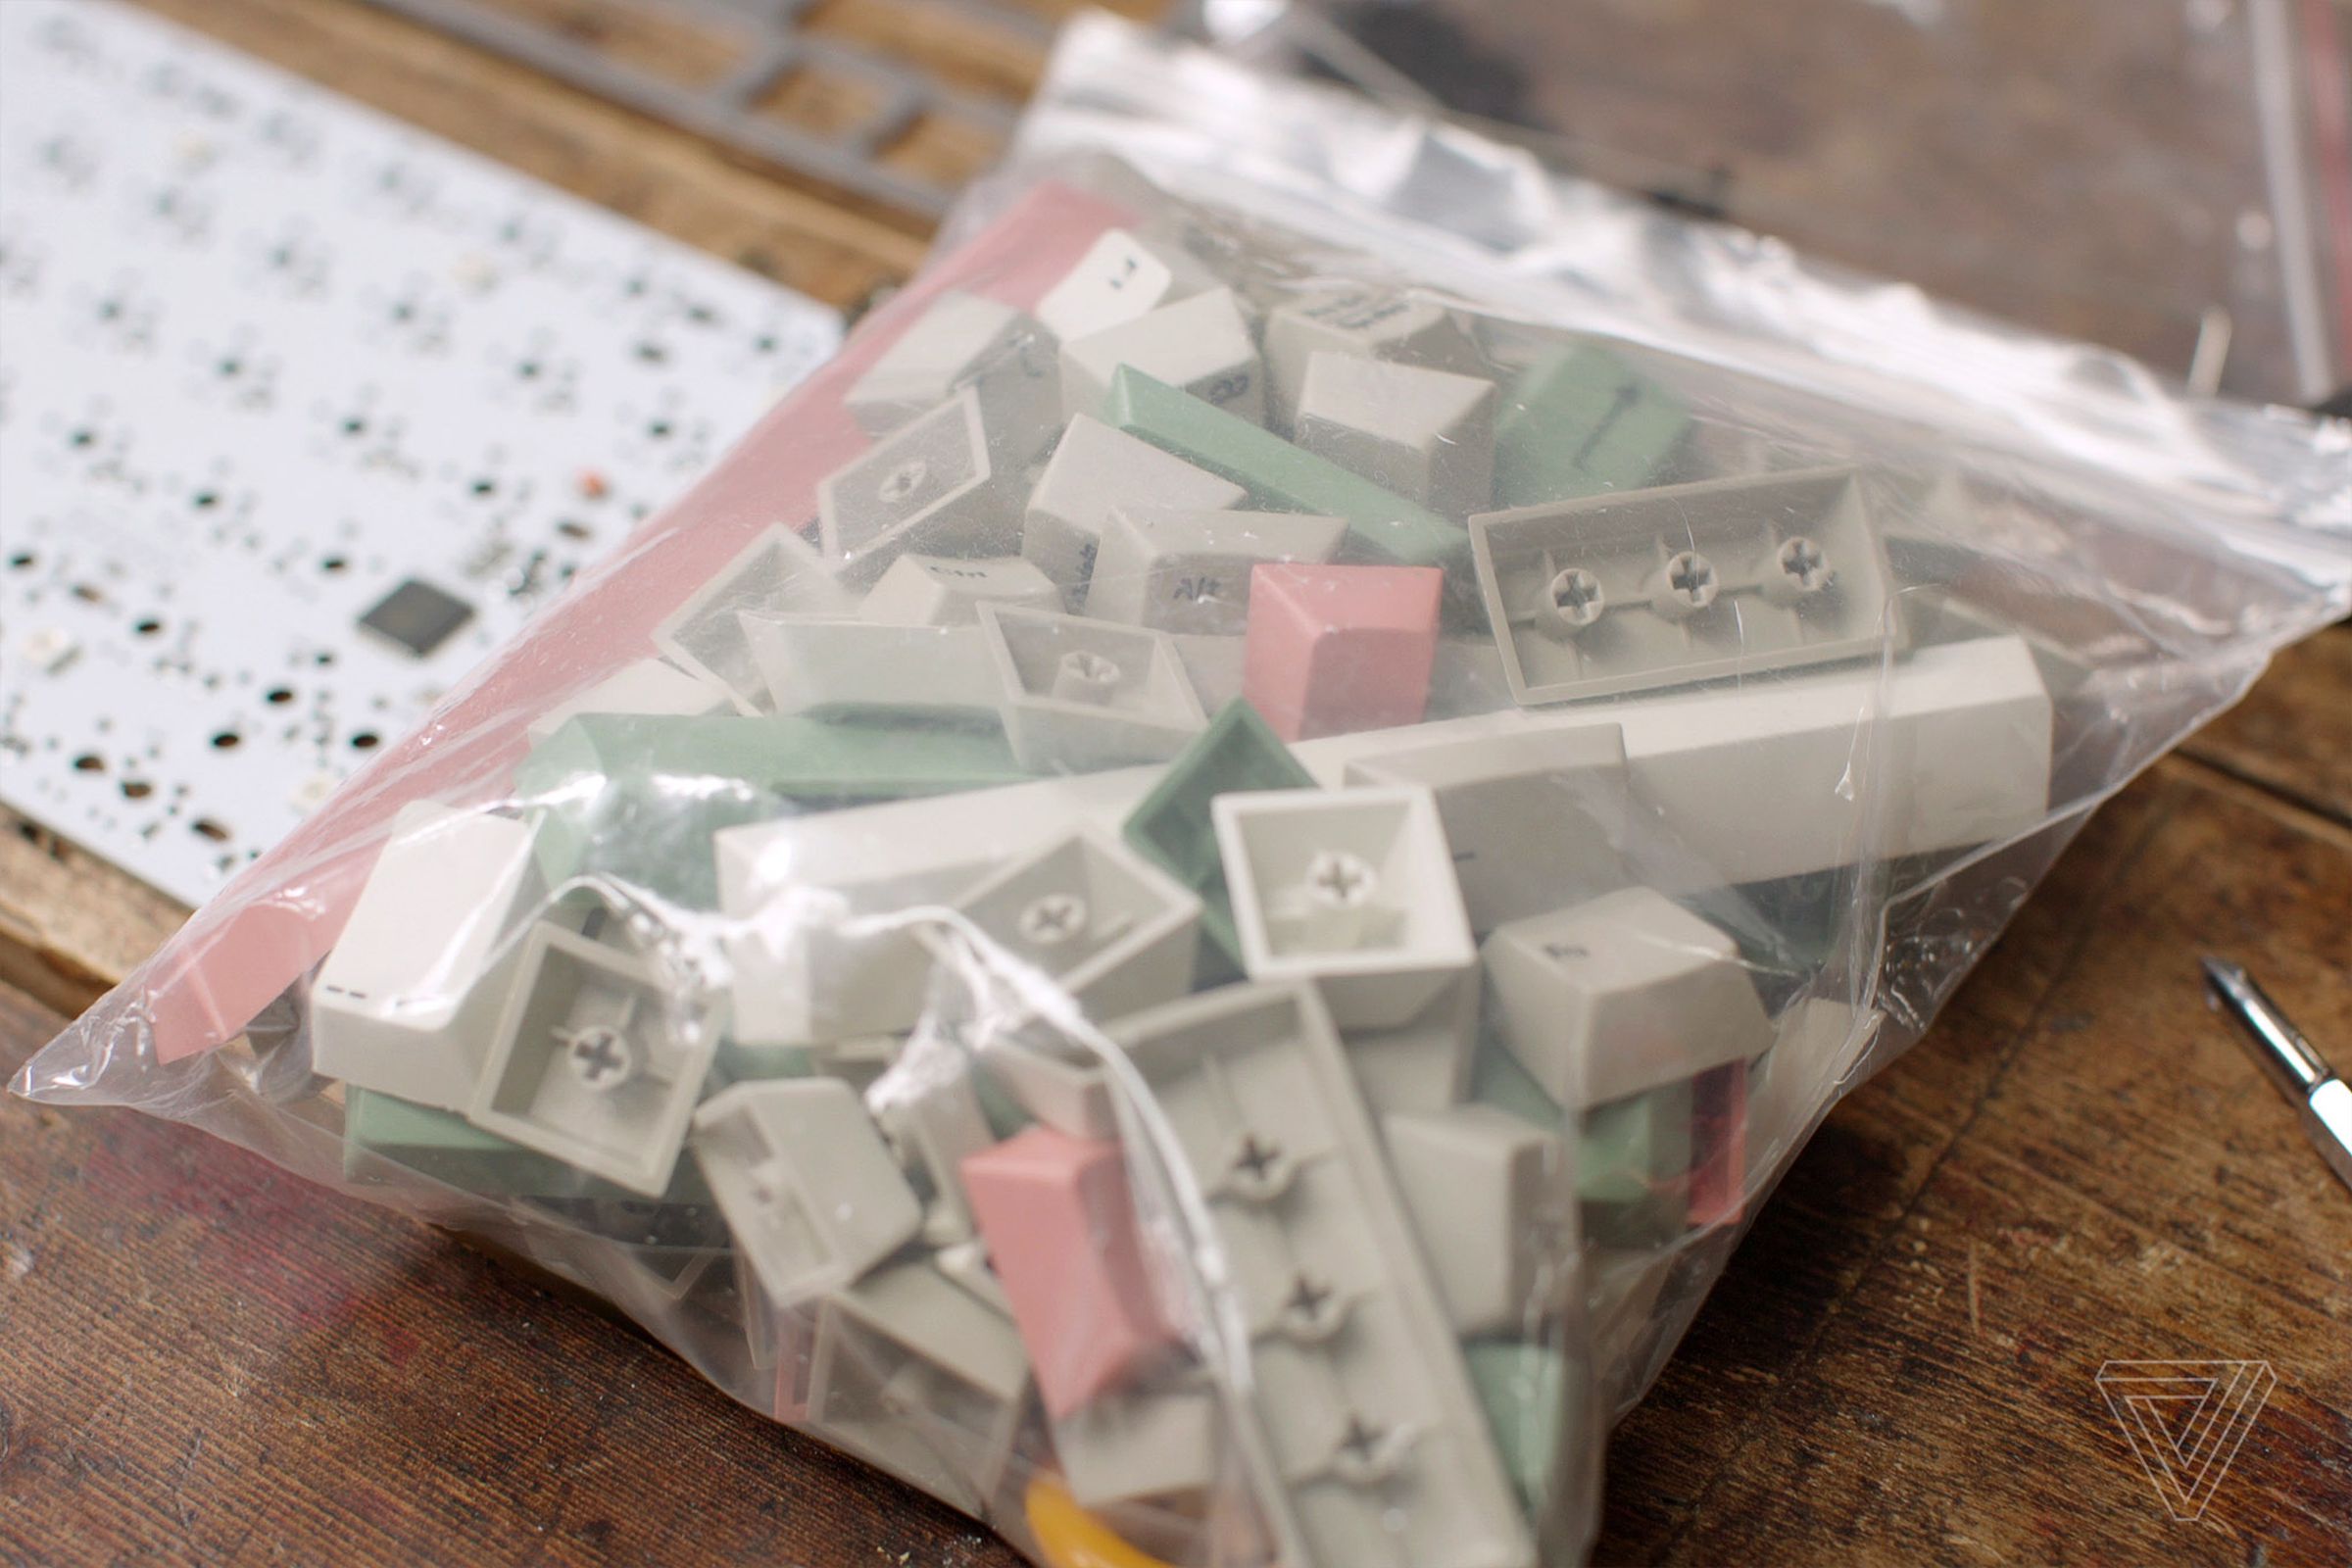 My keycaps were made of PBT plastic, and featured a retro beige design.